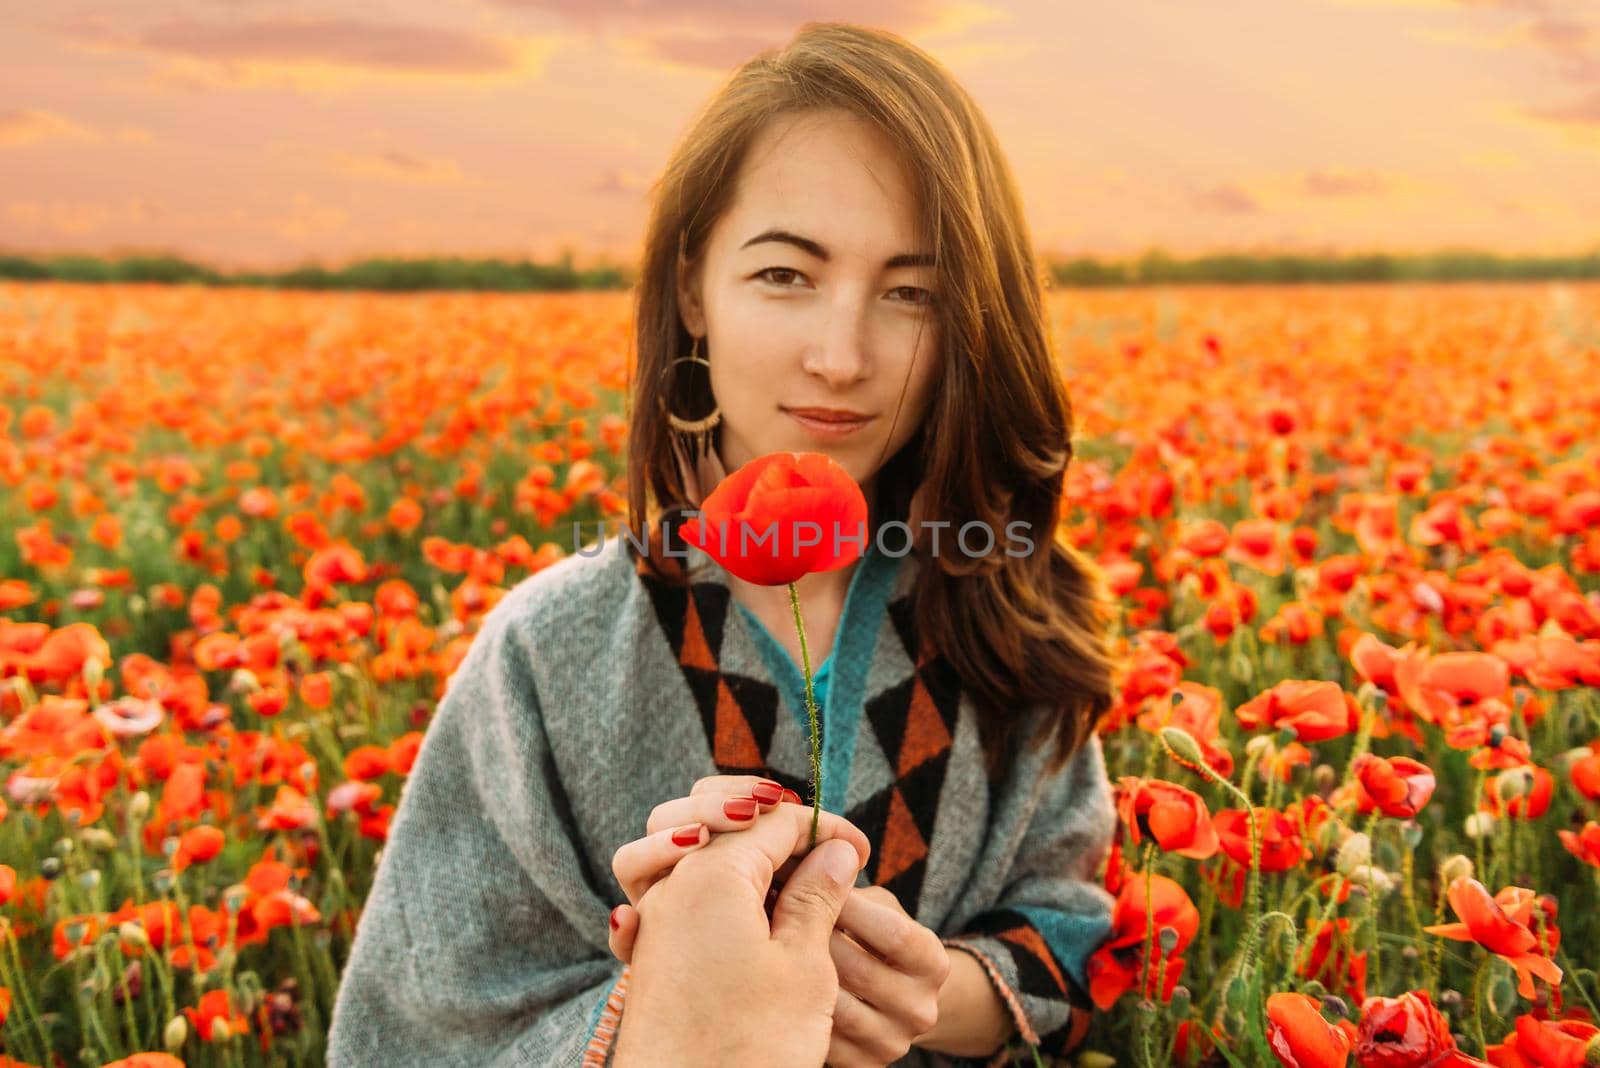 Man's hand giving poppy flower to beautiful young woman in summer meadow, point of view.